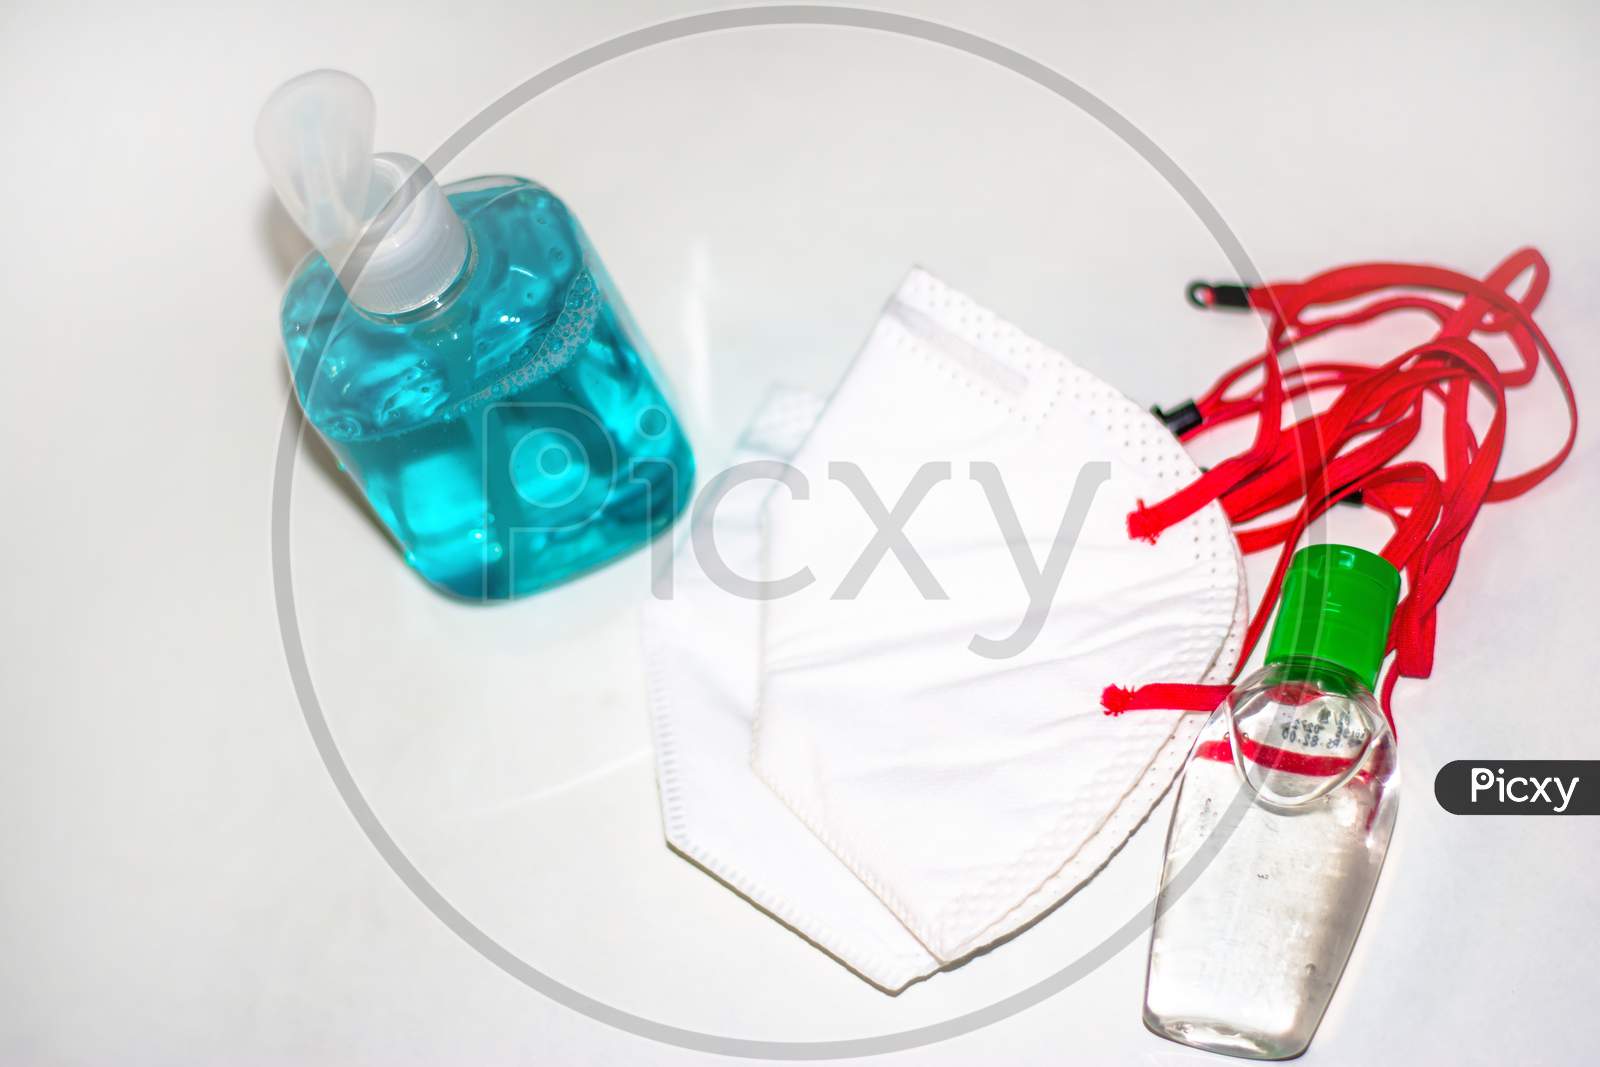 Corona virus prevention surgical masks, and hand sanitizer gel, liquid handwash soap for hand hygiene spread protection.